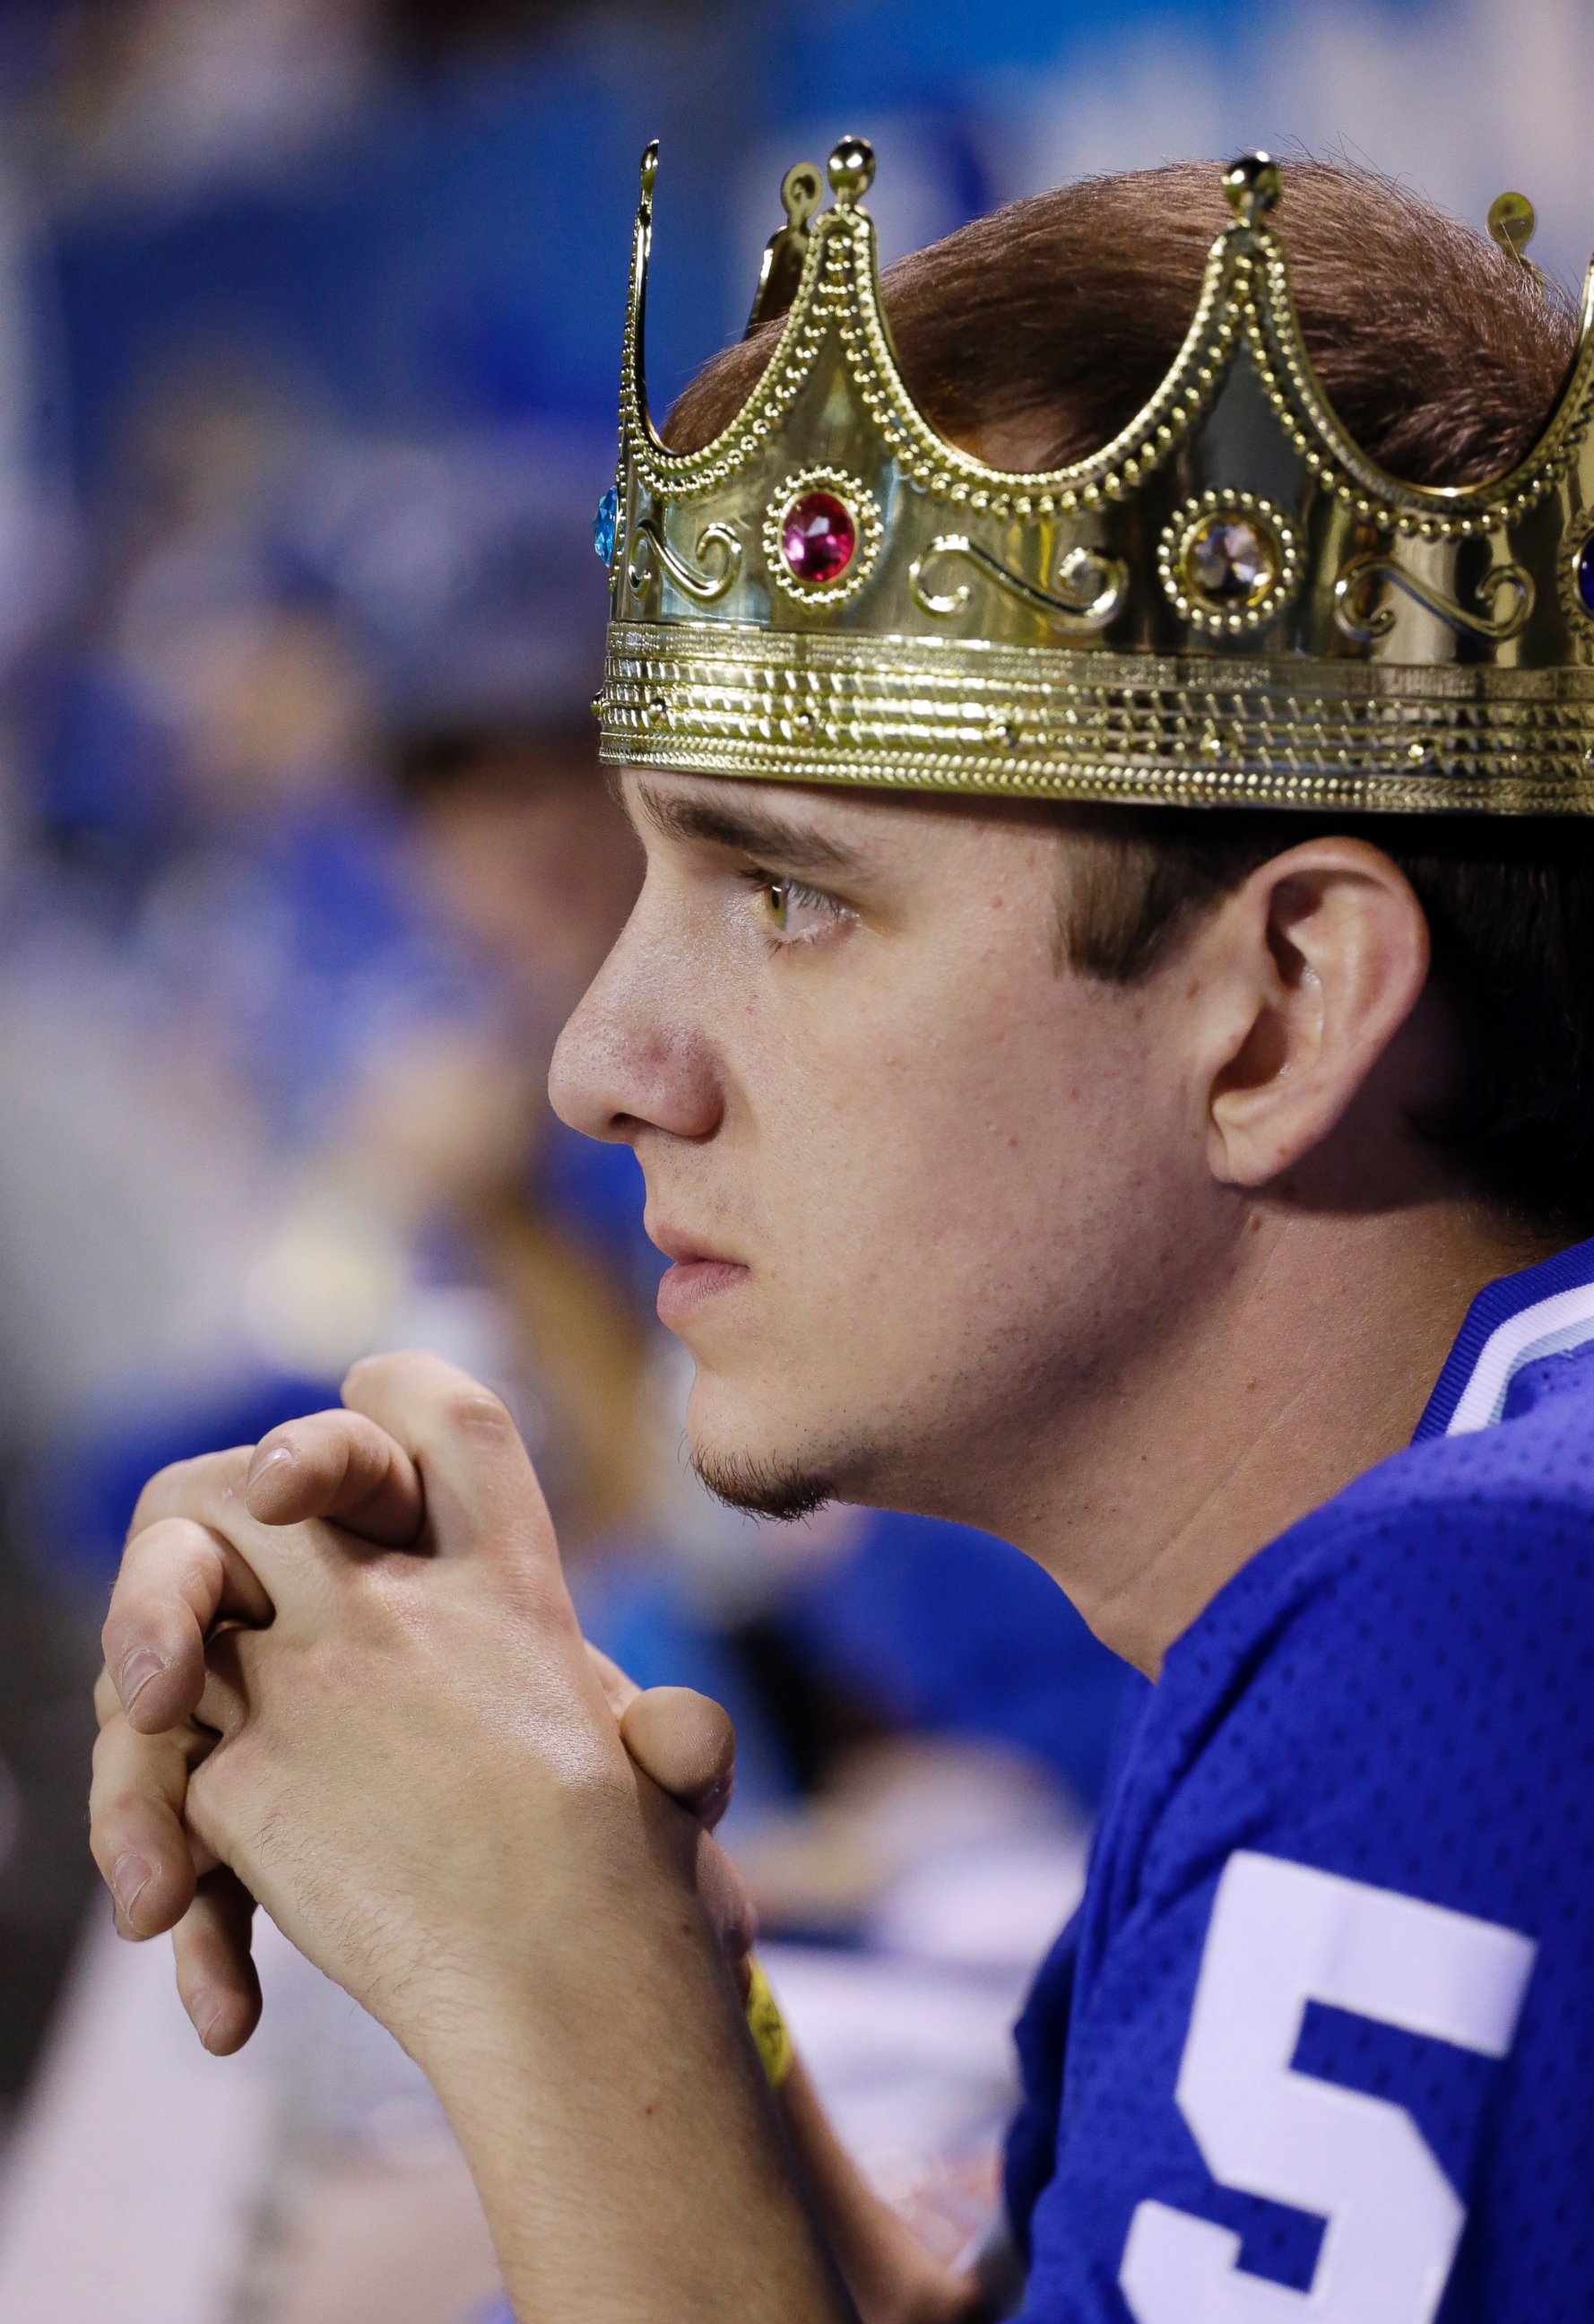 A Kansas City Royals fan watches during the ninth inning of Game 1 of baseball's World Series against the San Francisco Giants, Oct. 21, 2014, in Kansas City, Mo.